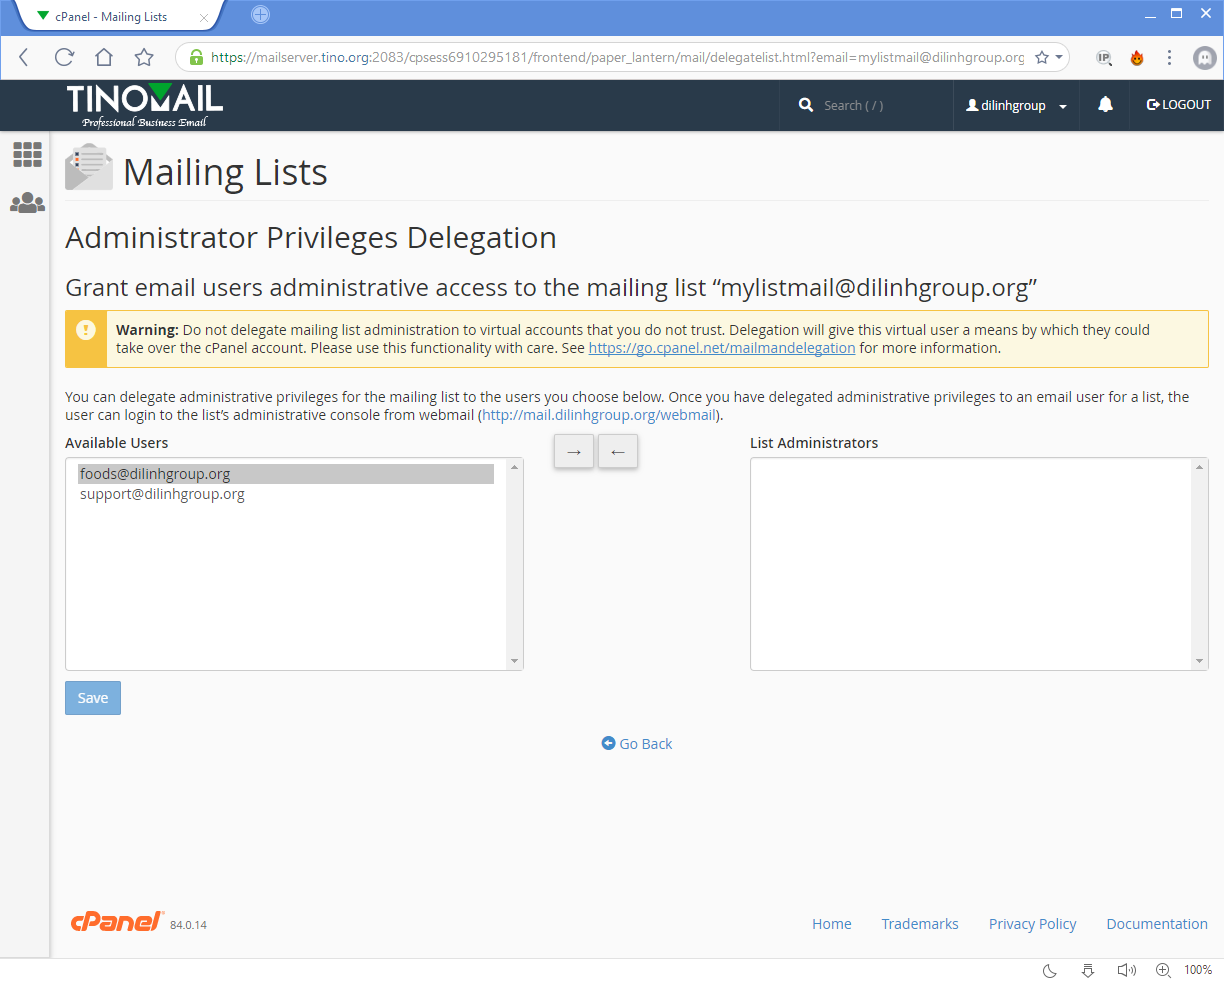 [cPanel] - Mailing Lists 21